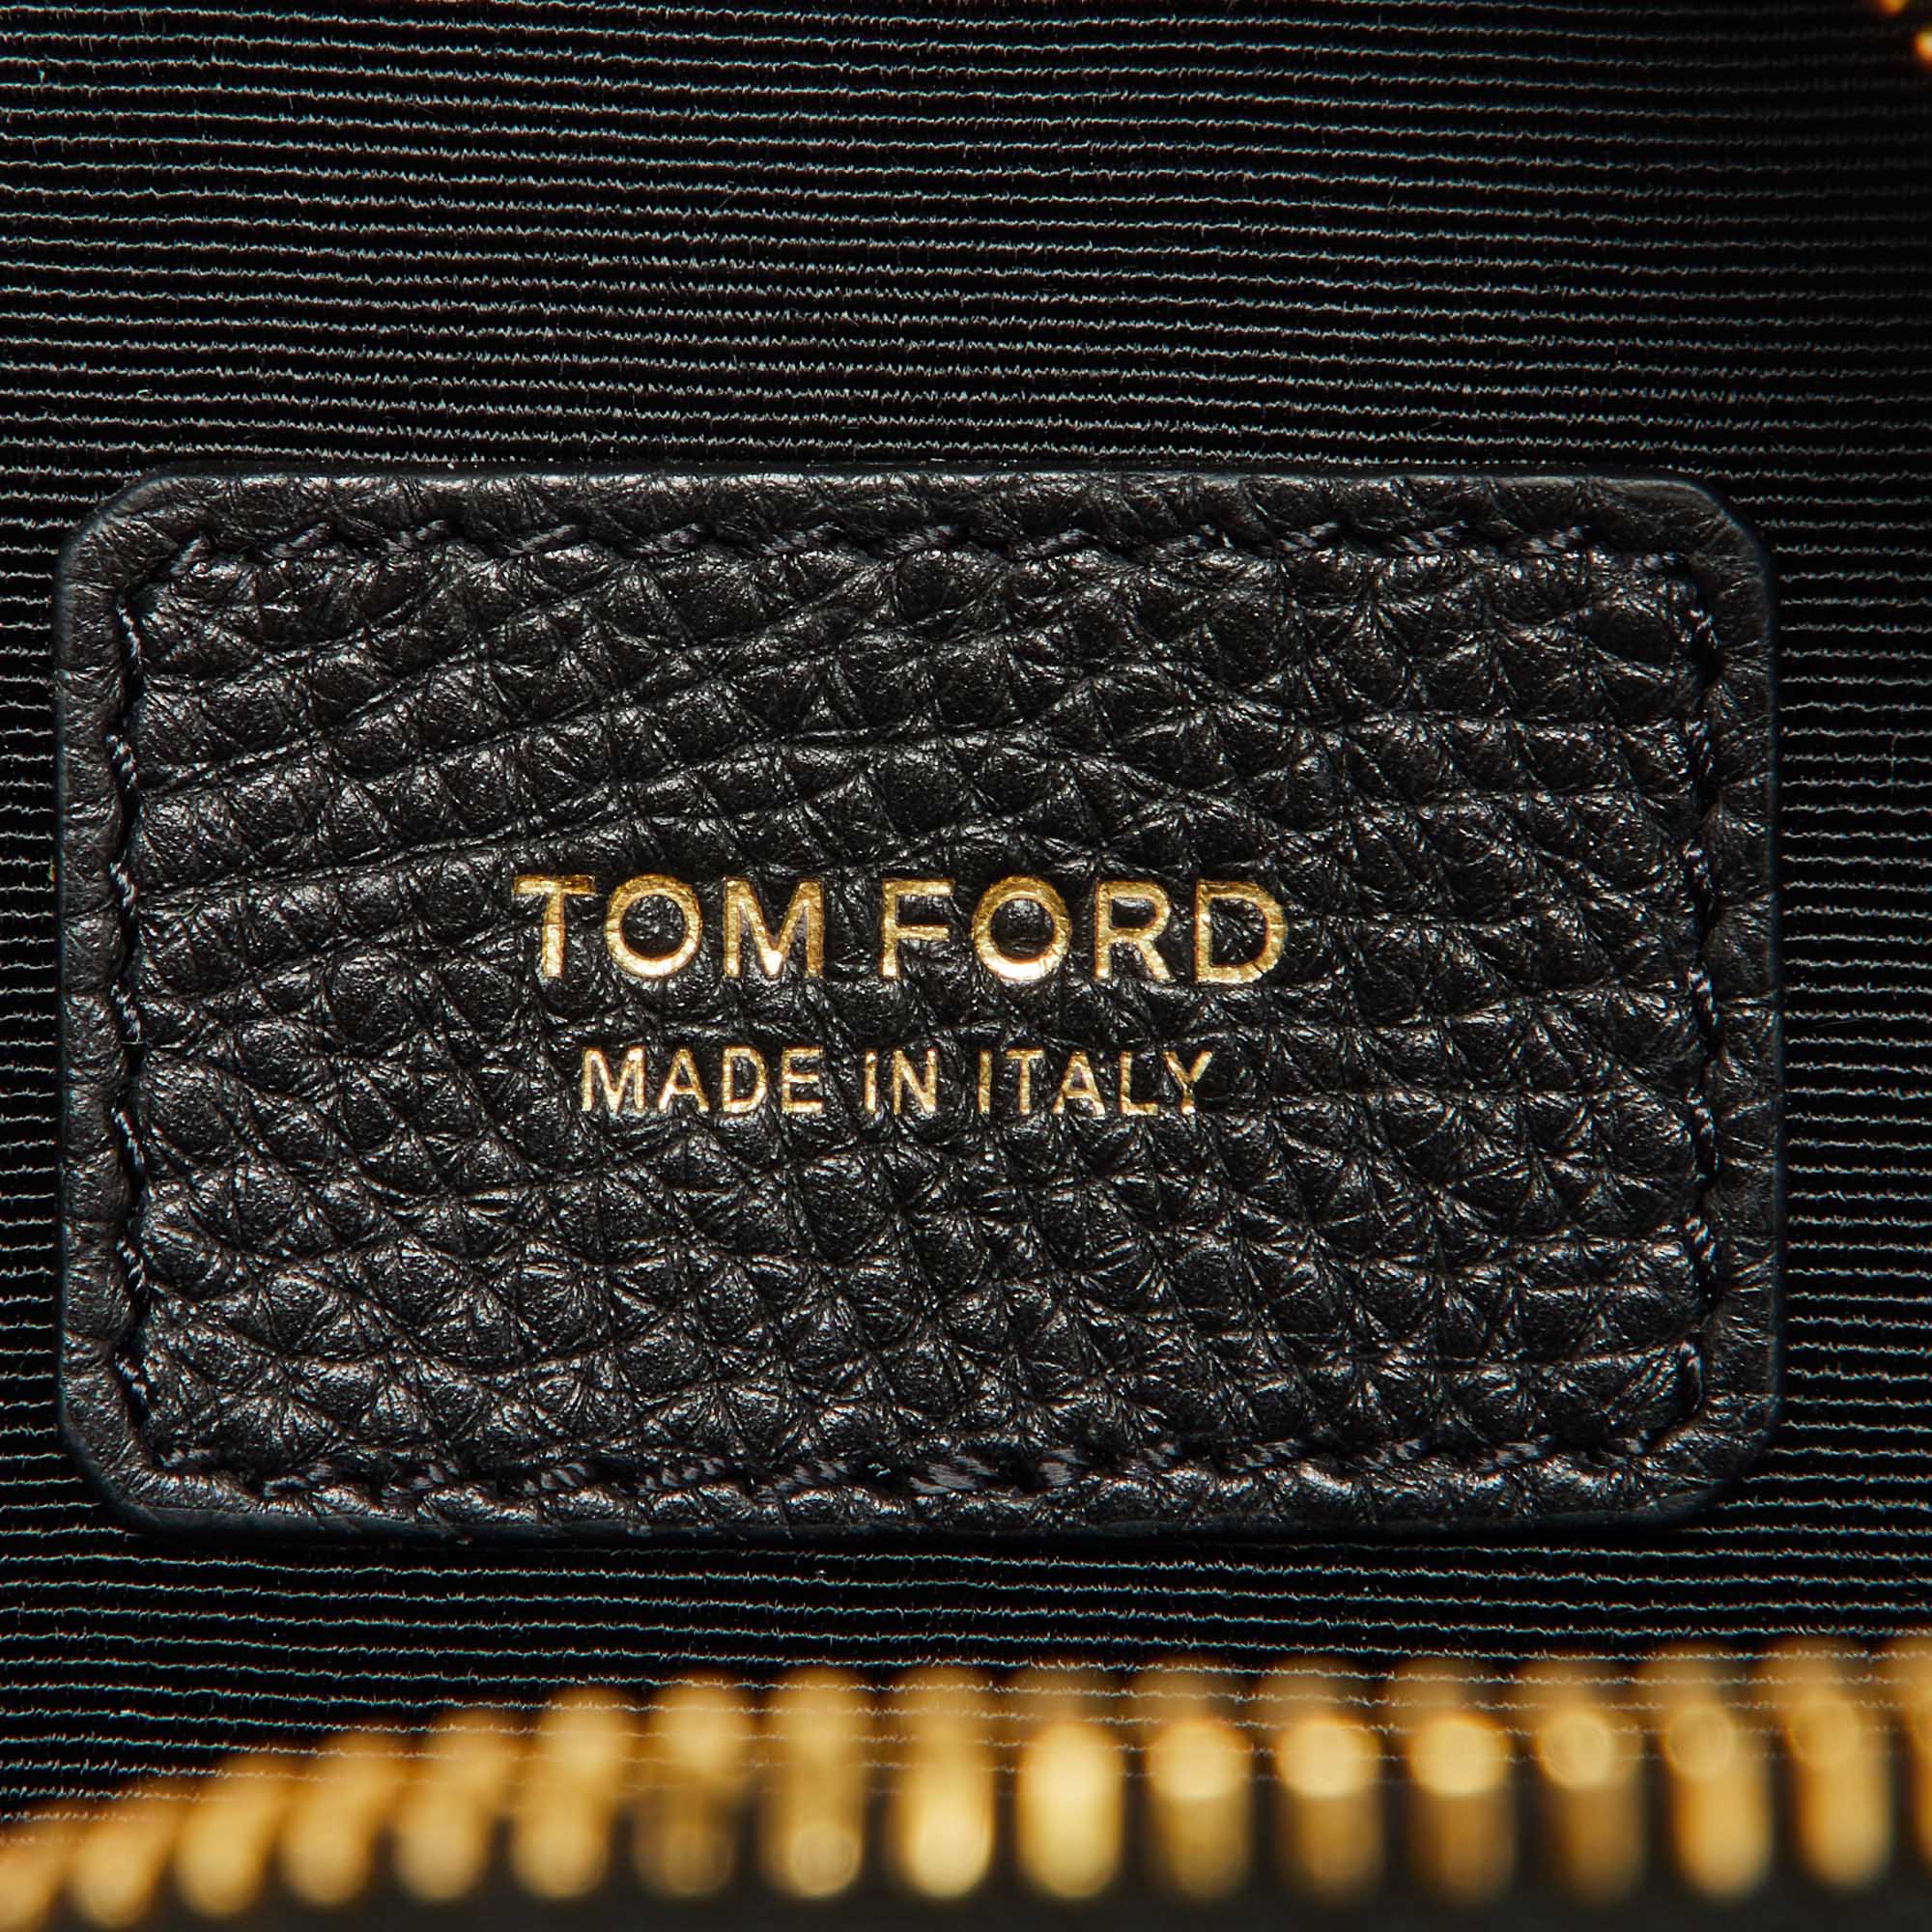 Tom Ford Black Leather Zip Pouch